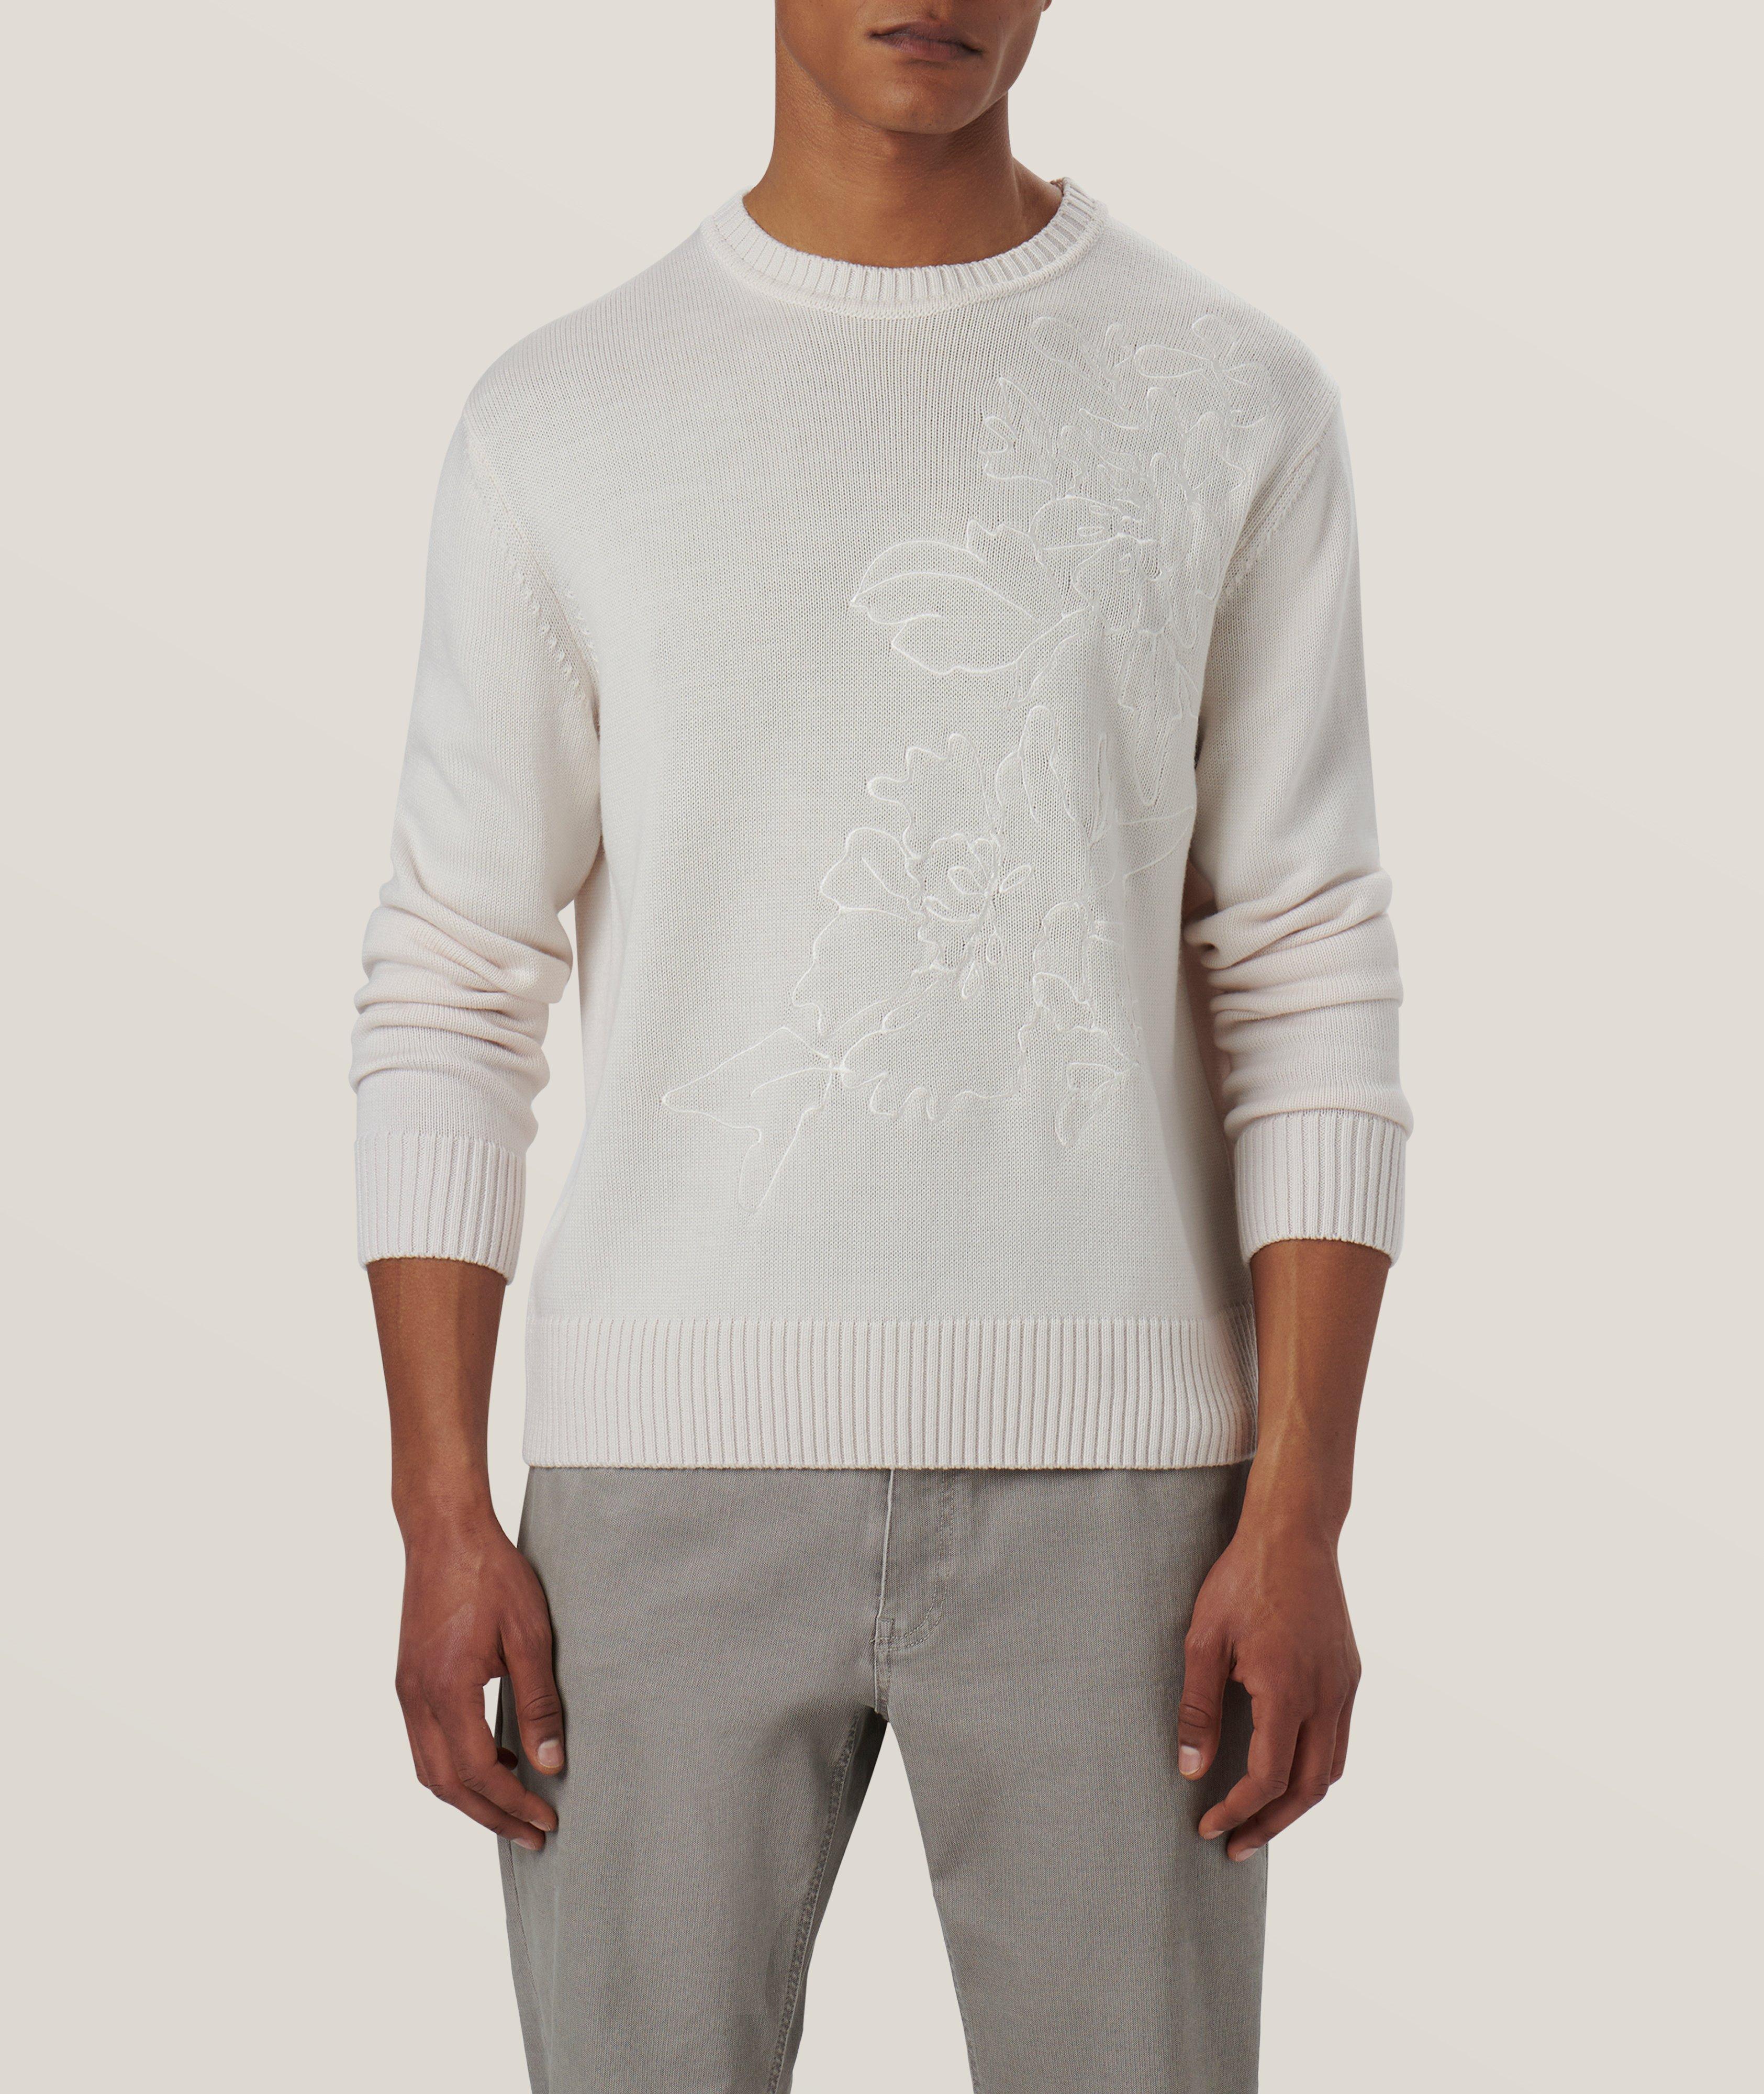 Floral Embroidered Merino Wool Sweater image 2